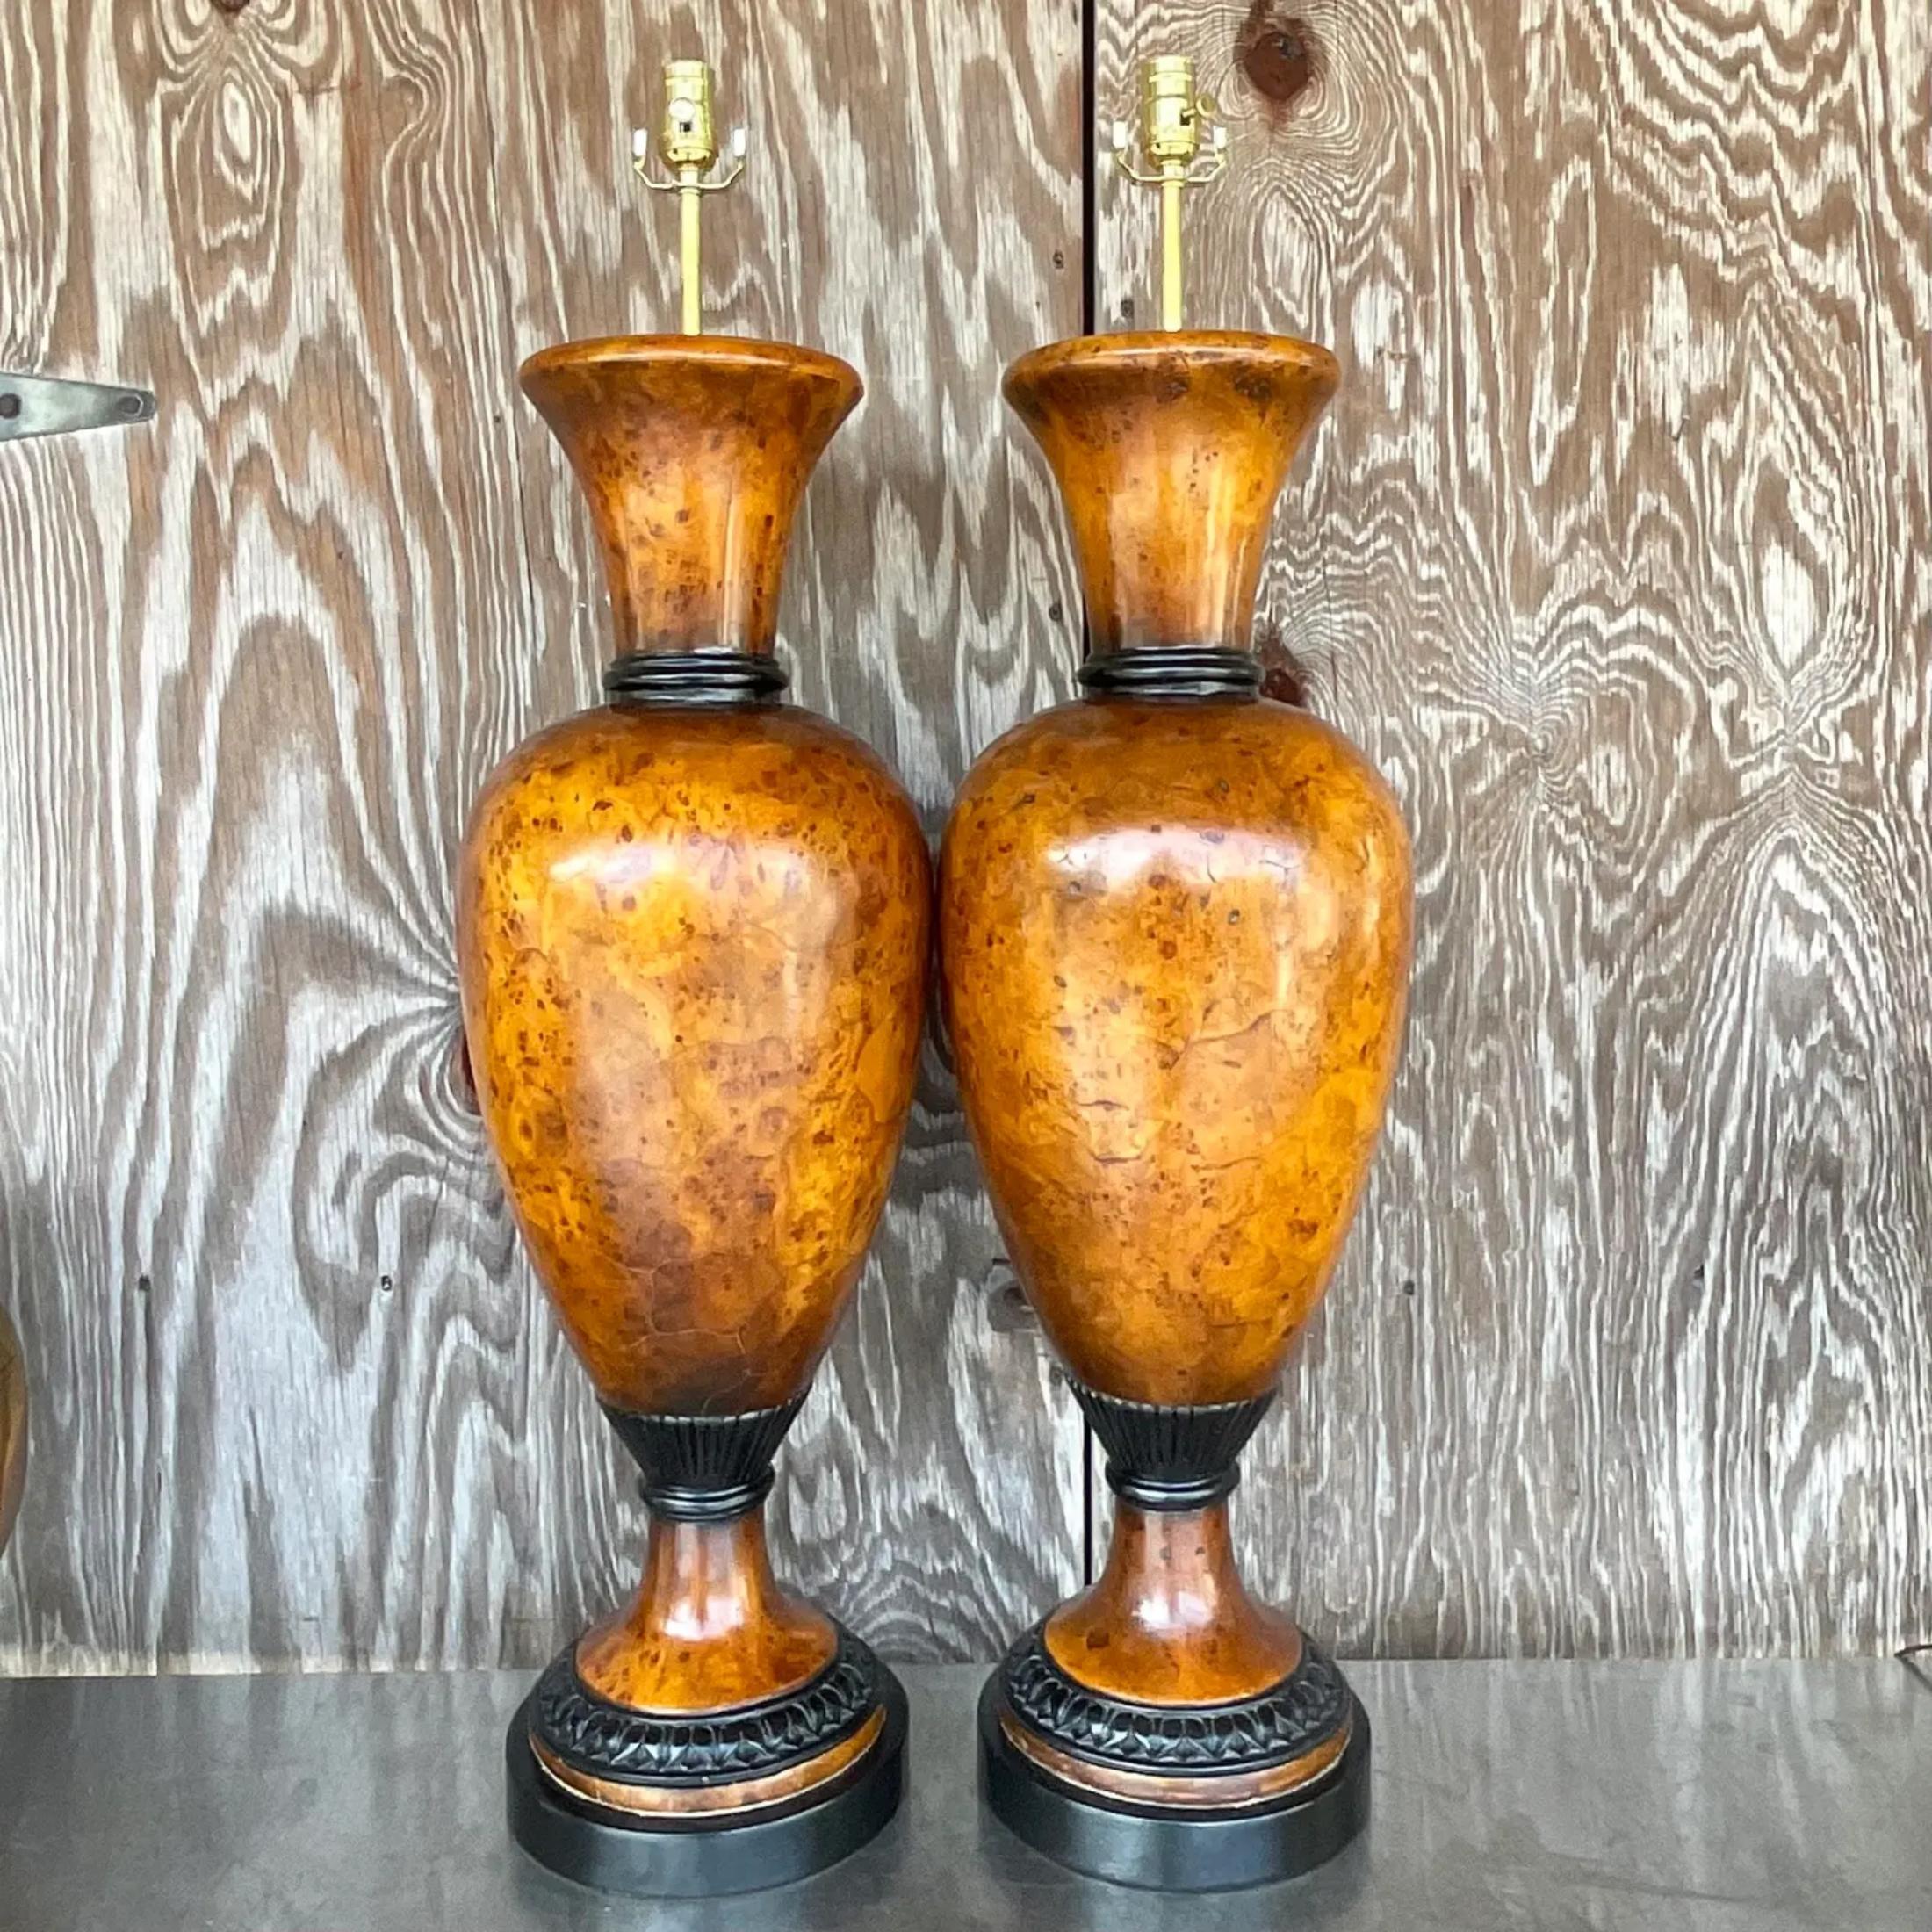 A fabulous pair of vintage Boho table lamps. Chic Burl wood urns with a Biedermeier motif. Monumental in size and drama. Fully restored with all new wiring and hardware. Acquired from a Palm Beach estate